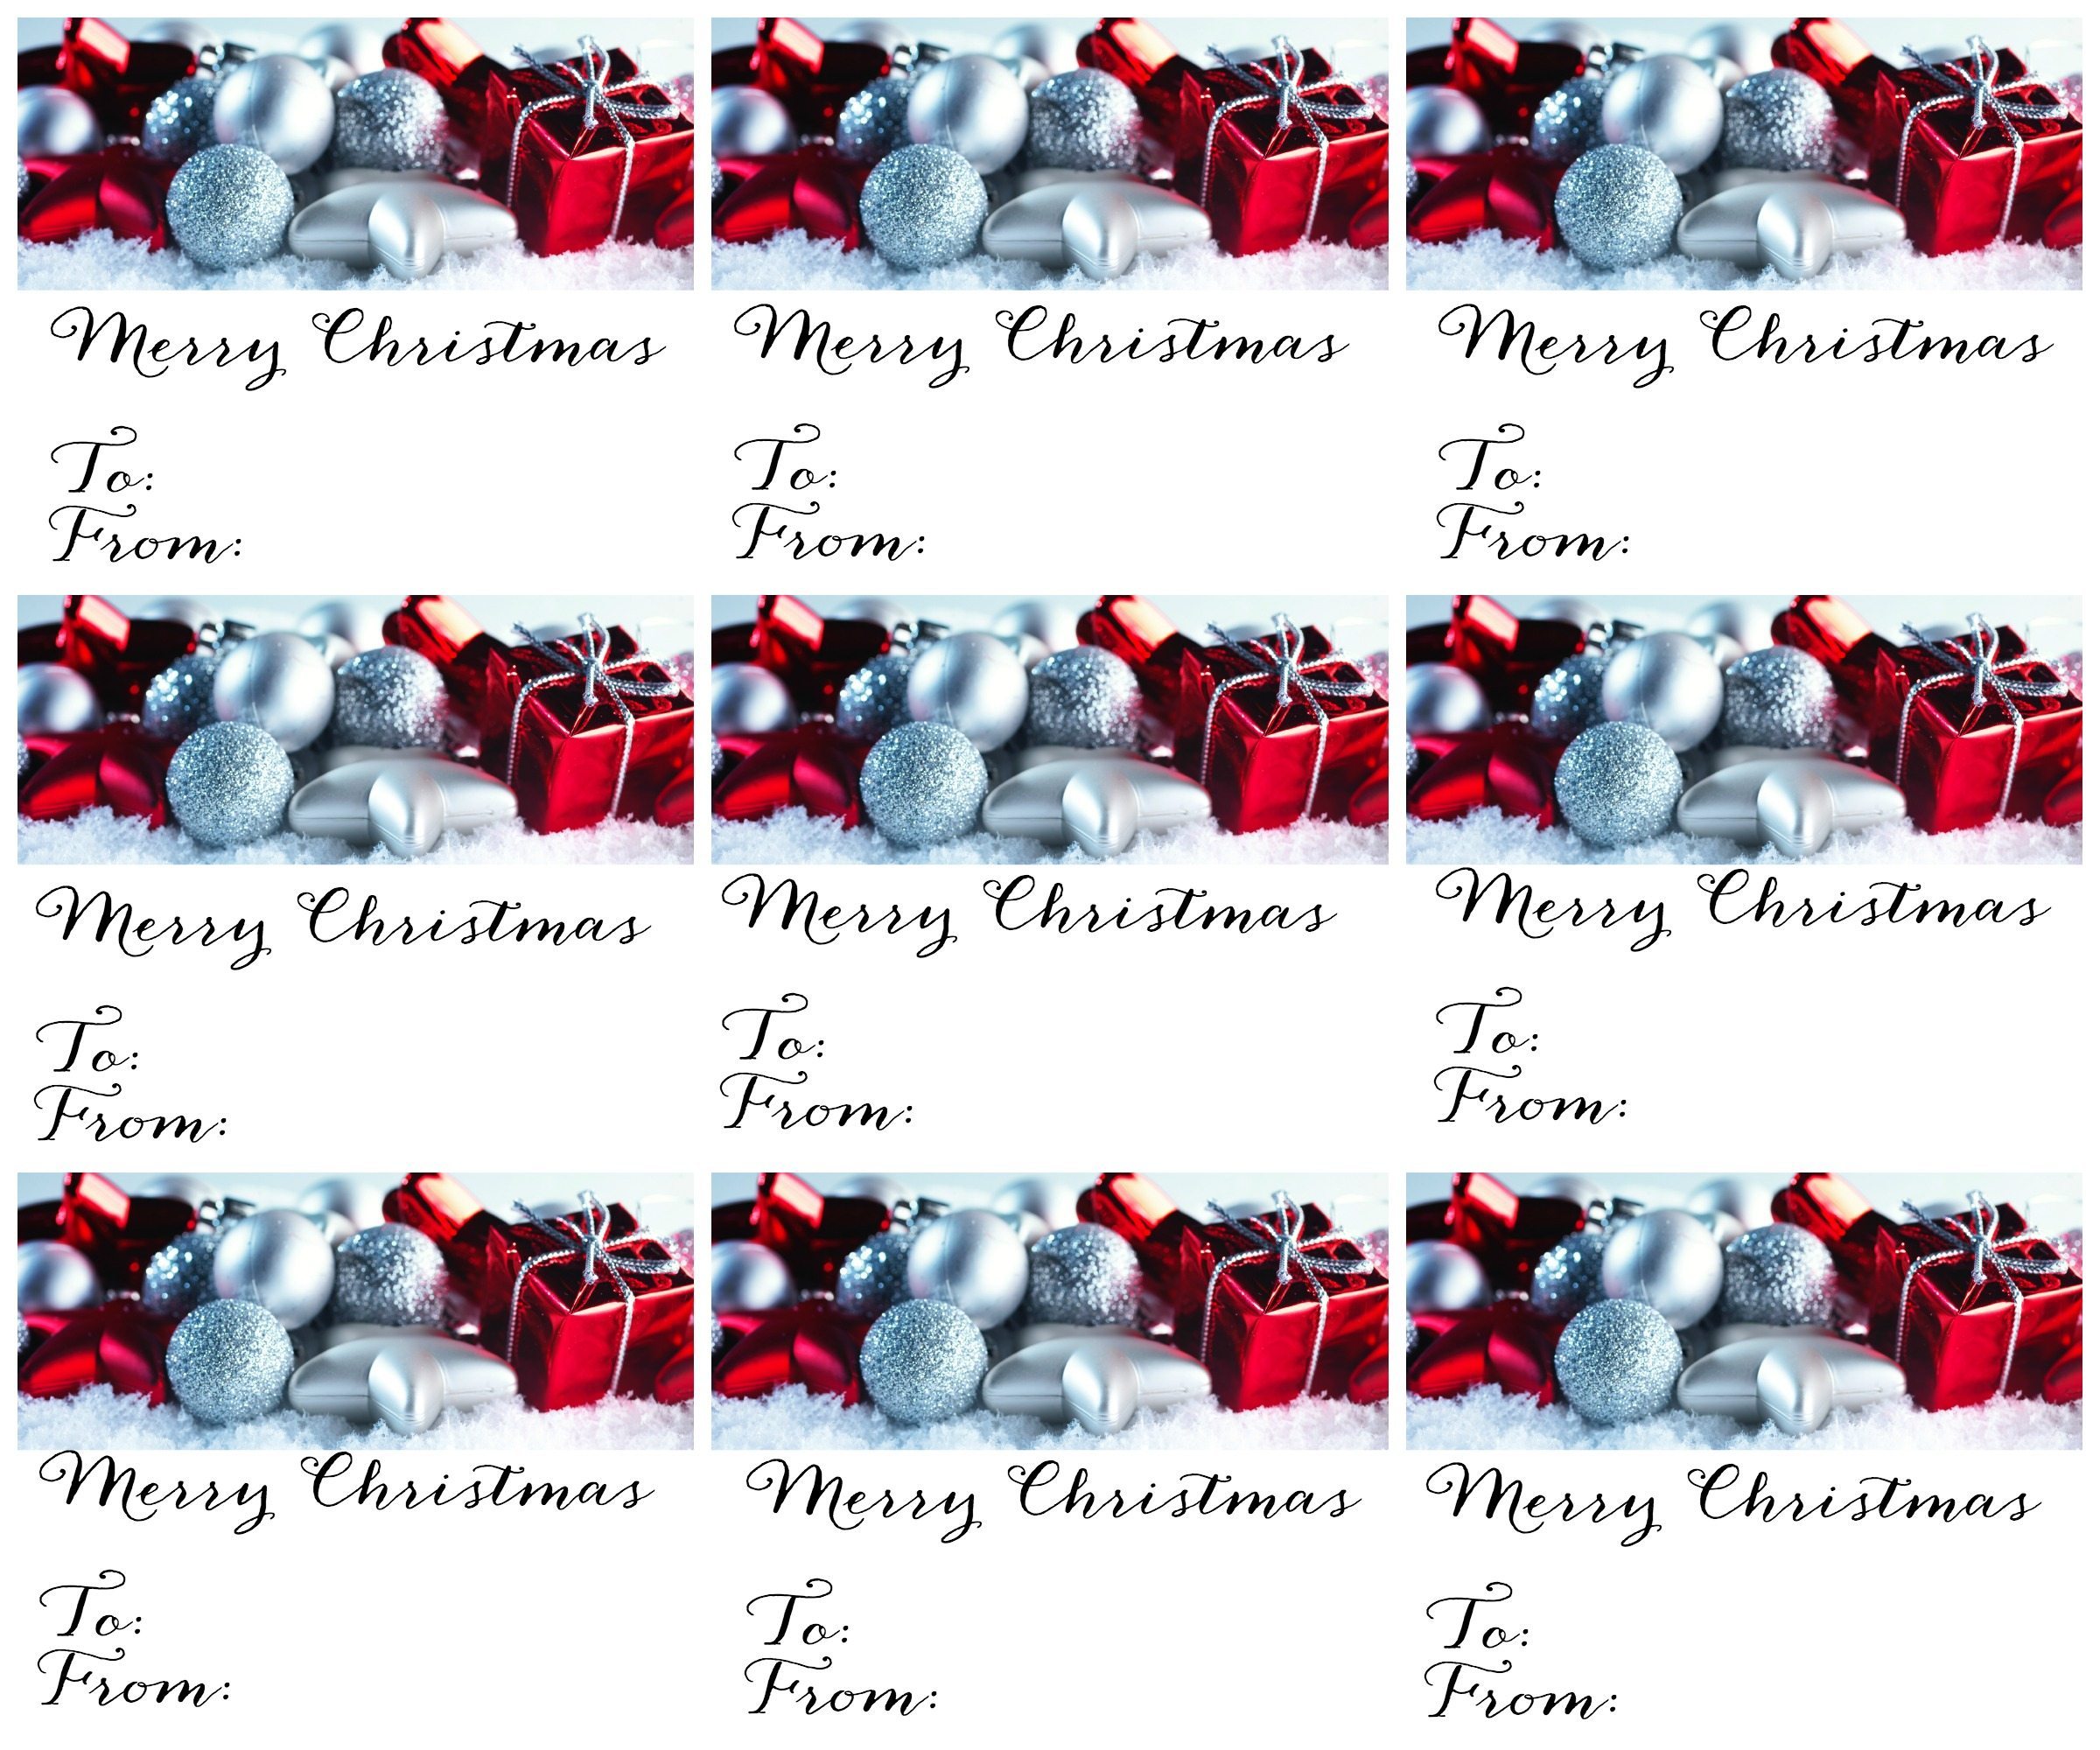 Christmas Gift Tags Silver and Red